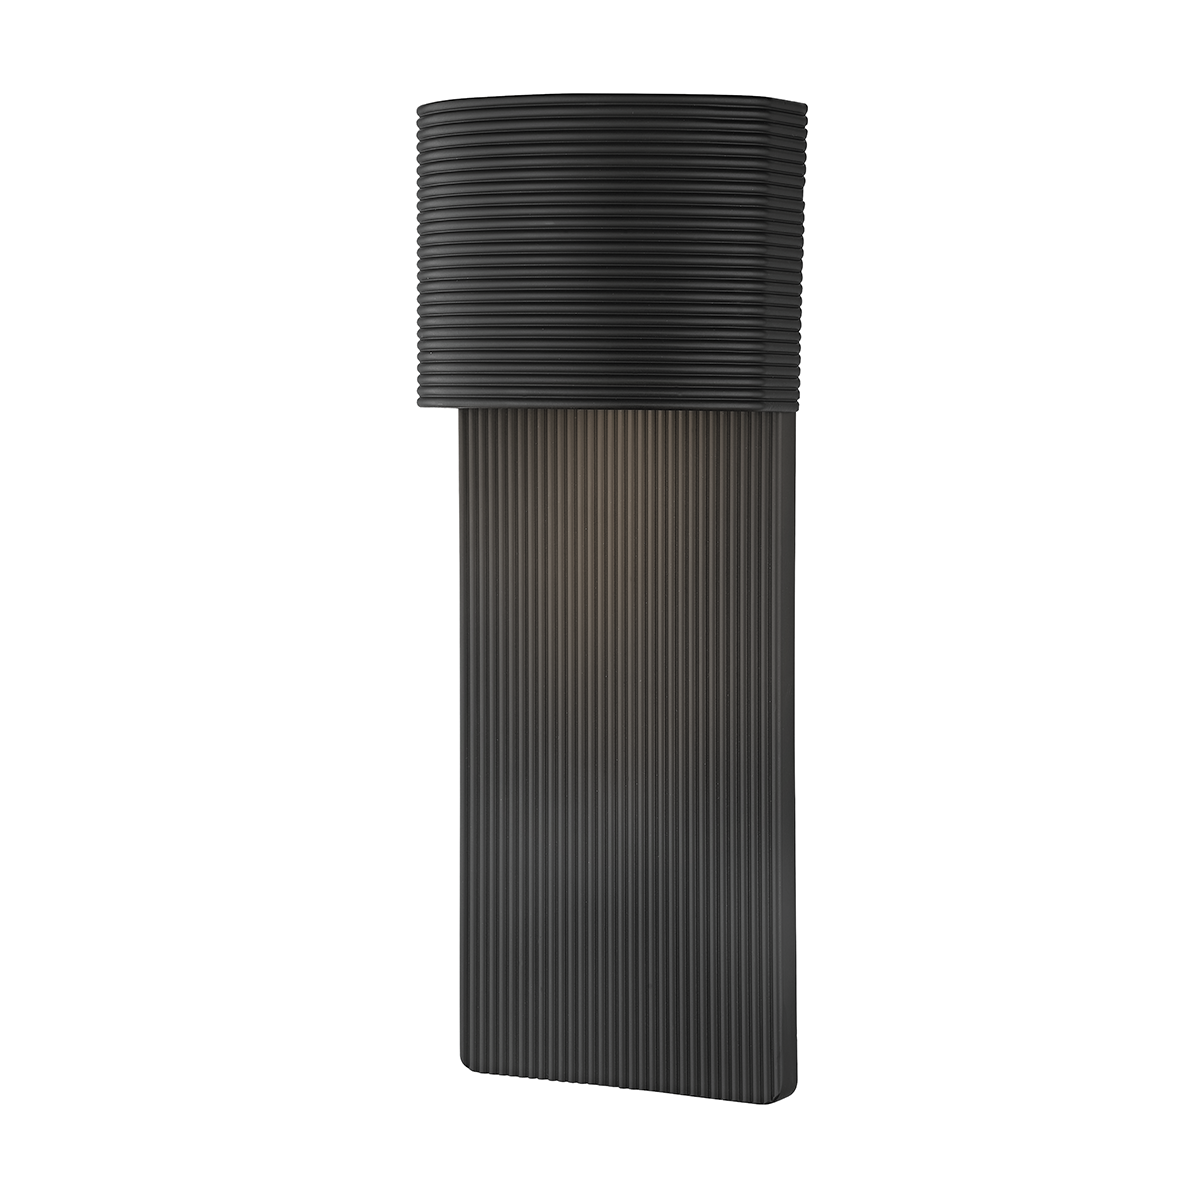 Troy Lighting 1 LIGHT LARGE EXTERIOR WALL SCONCE B1217 Outdoor l Wall Troy Lighting SOFT BLACK  